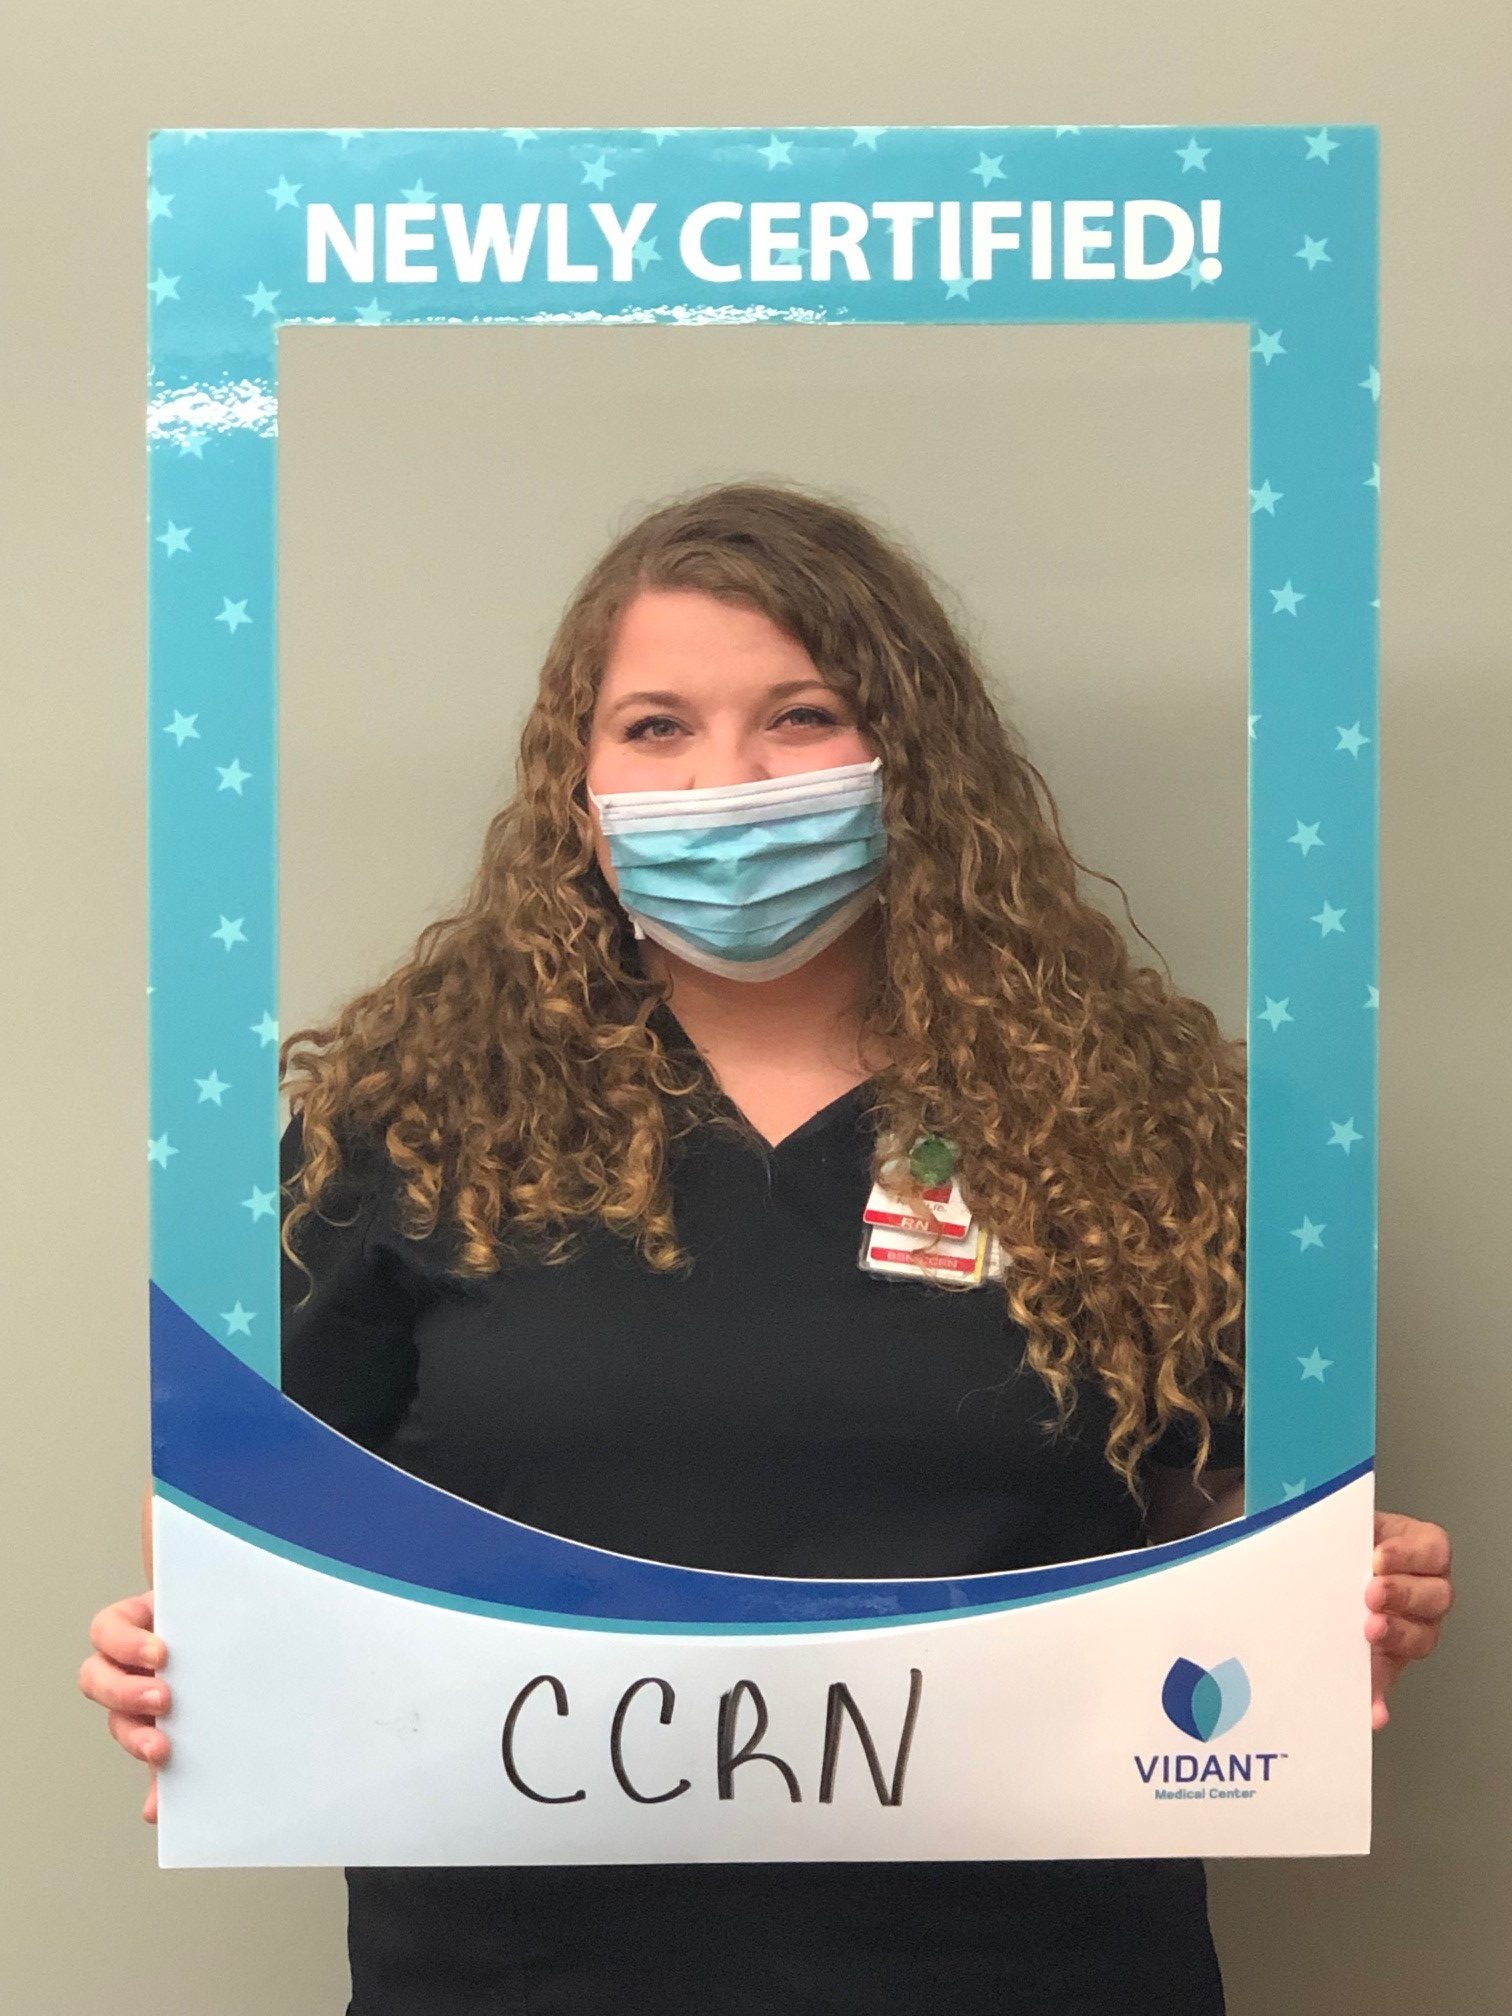 Natalie Capps, BSN, RN, CCRN works on the Cardiac Intensive Care Unit and received her critical care registered nurse certification